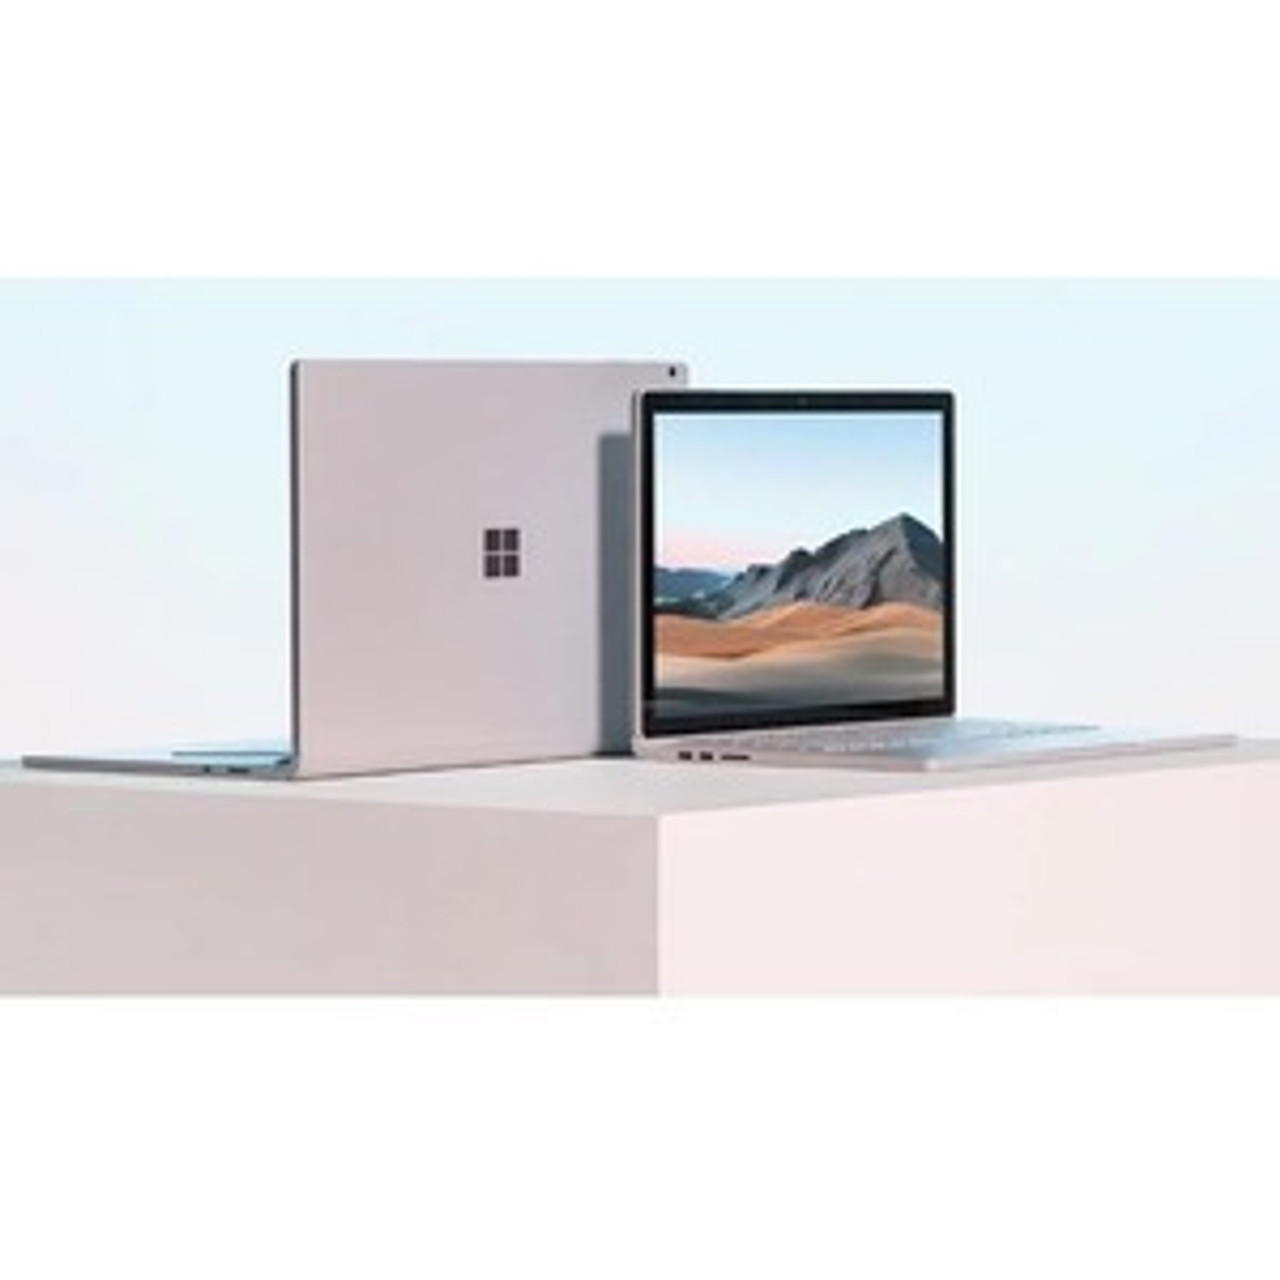 Microsoft Surface Book 3 15" Touchscreen Detachable 2 in 1 Notebook - 3240 x 2160 - Intel Core i7 - 32 GB RAM - 1 TB SSD - Platinum - TAA Compliant - Nvidia GeForce GTX 1660 Ti with Max-Q with 6 GB - PixelSense - 17.50 Hour Battery Run Time GPUCM